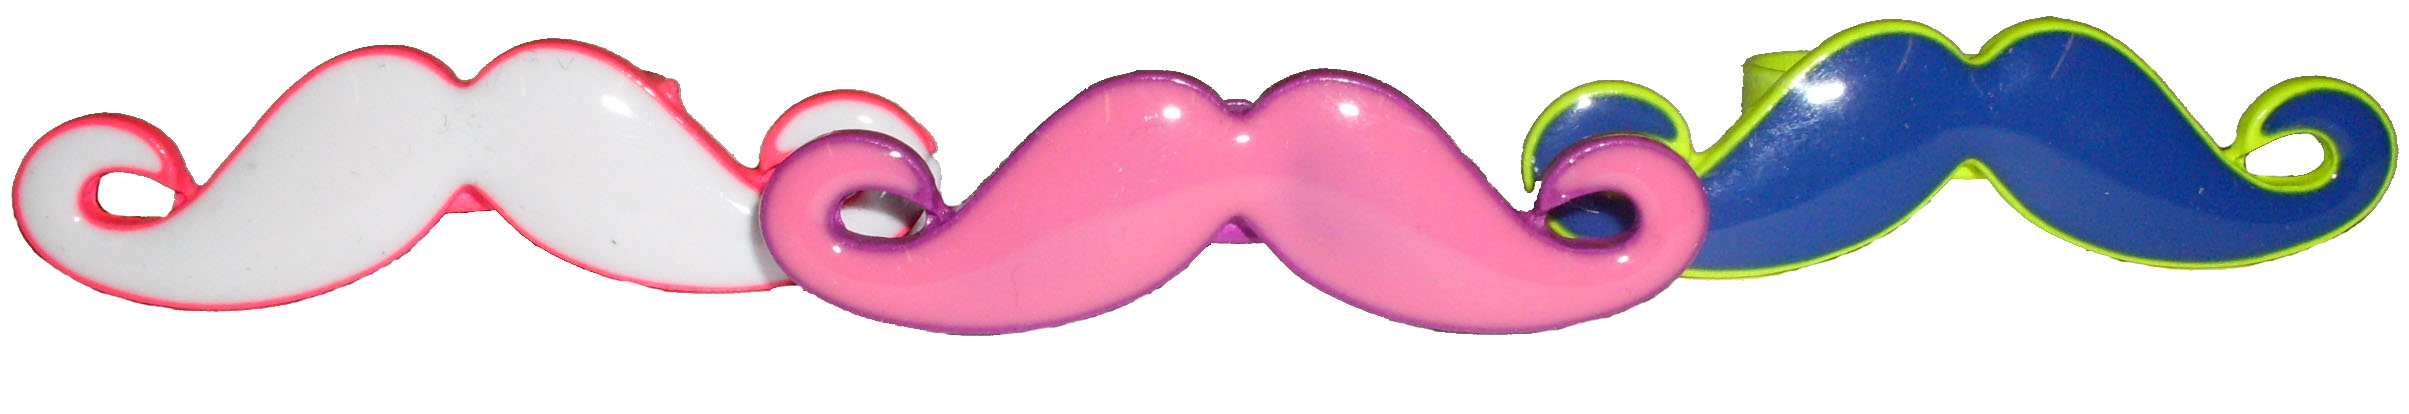 Reduced Price for Special Limited Time Acrylic Mustache Rings